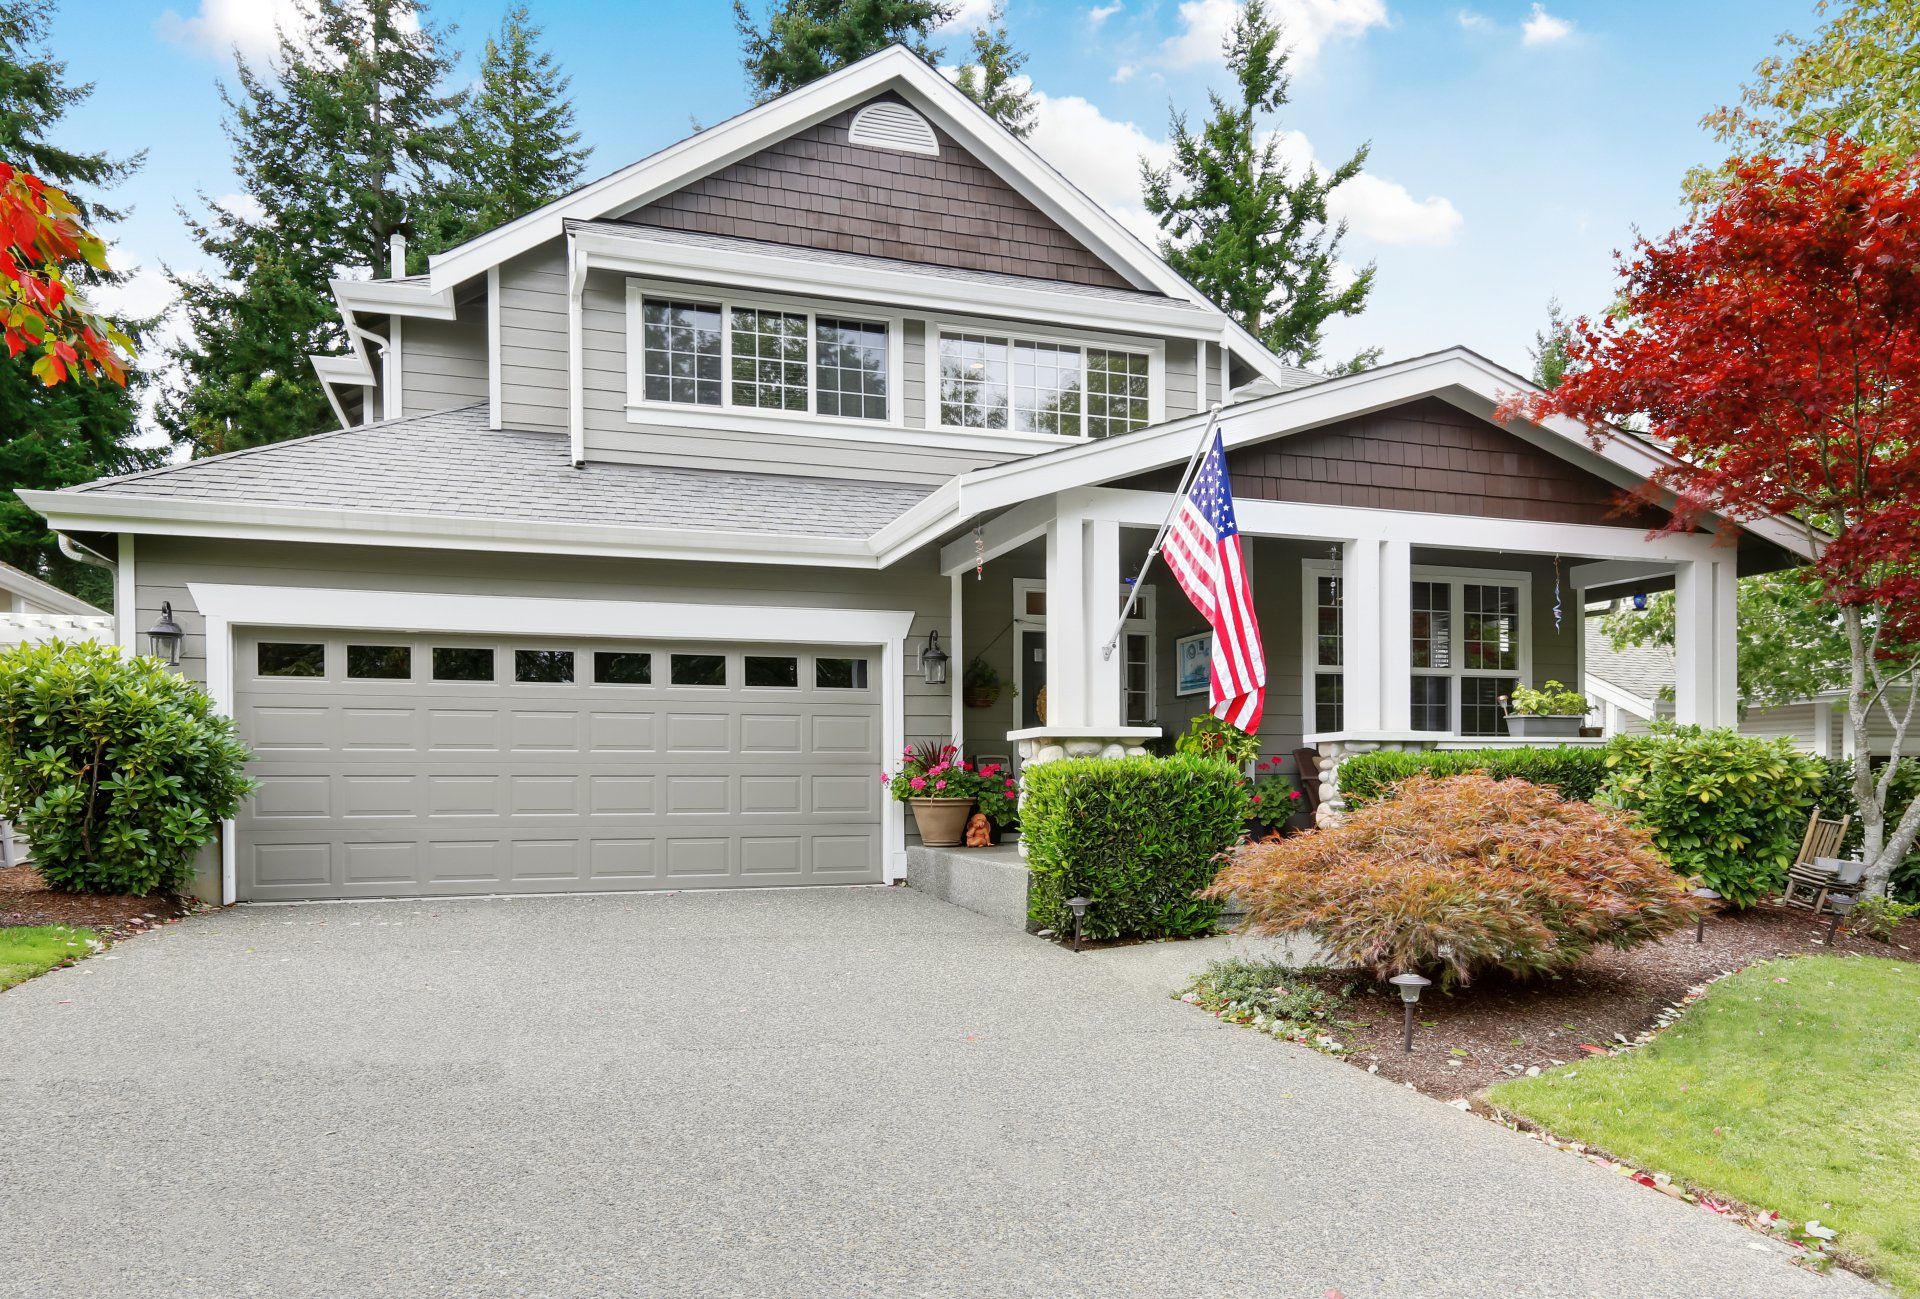 Nice curb appeal of grey house with garage and driveway.